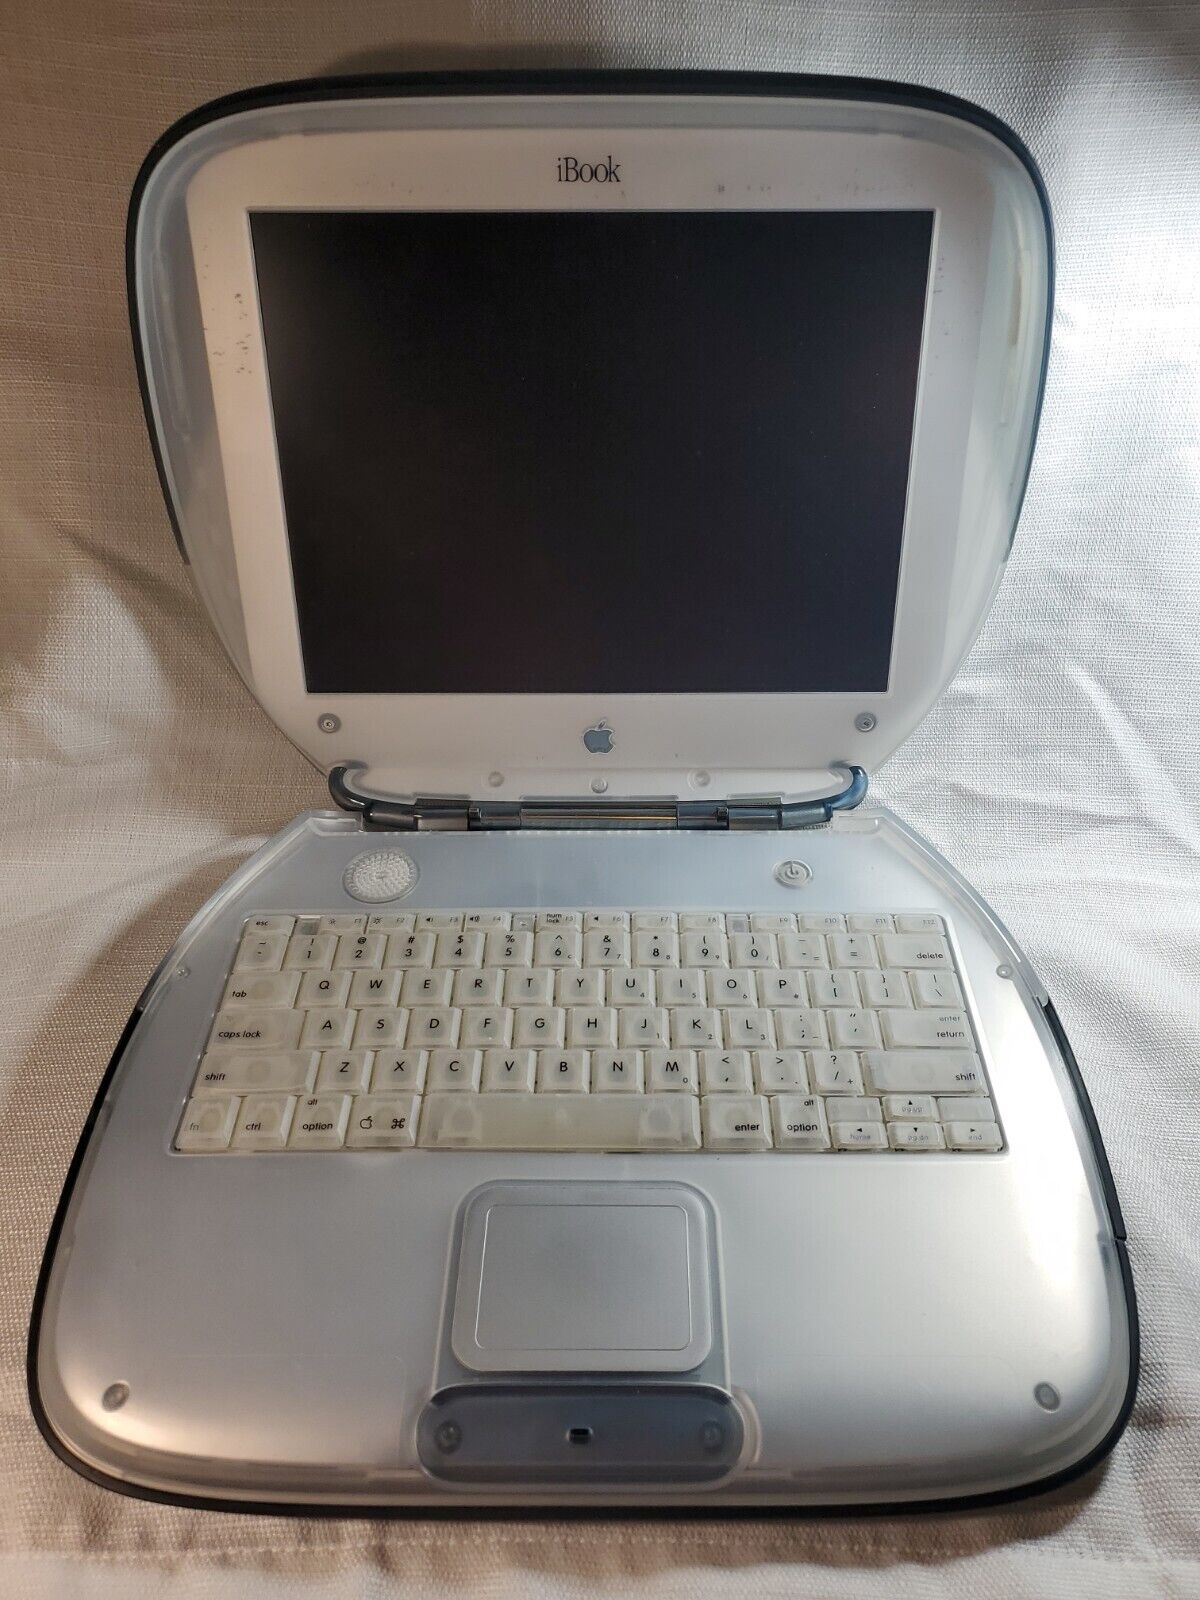 VINTAGE Apple iBook G3/366 Special Edition Graphite and Ice BAD HDD SEE PHOTOS